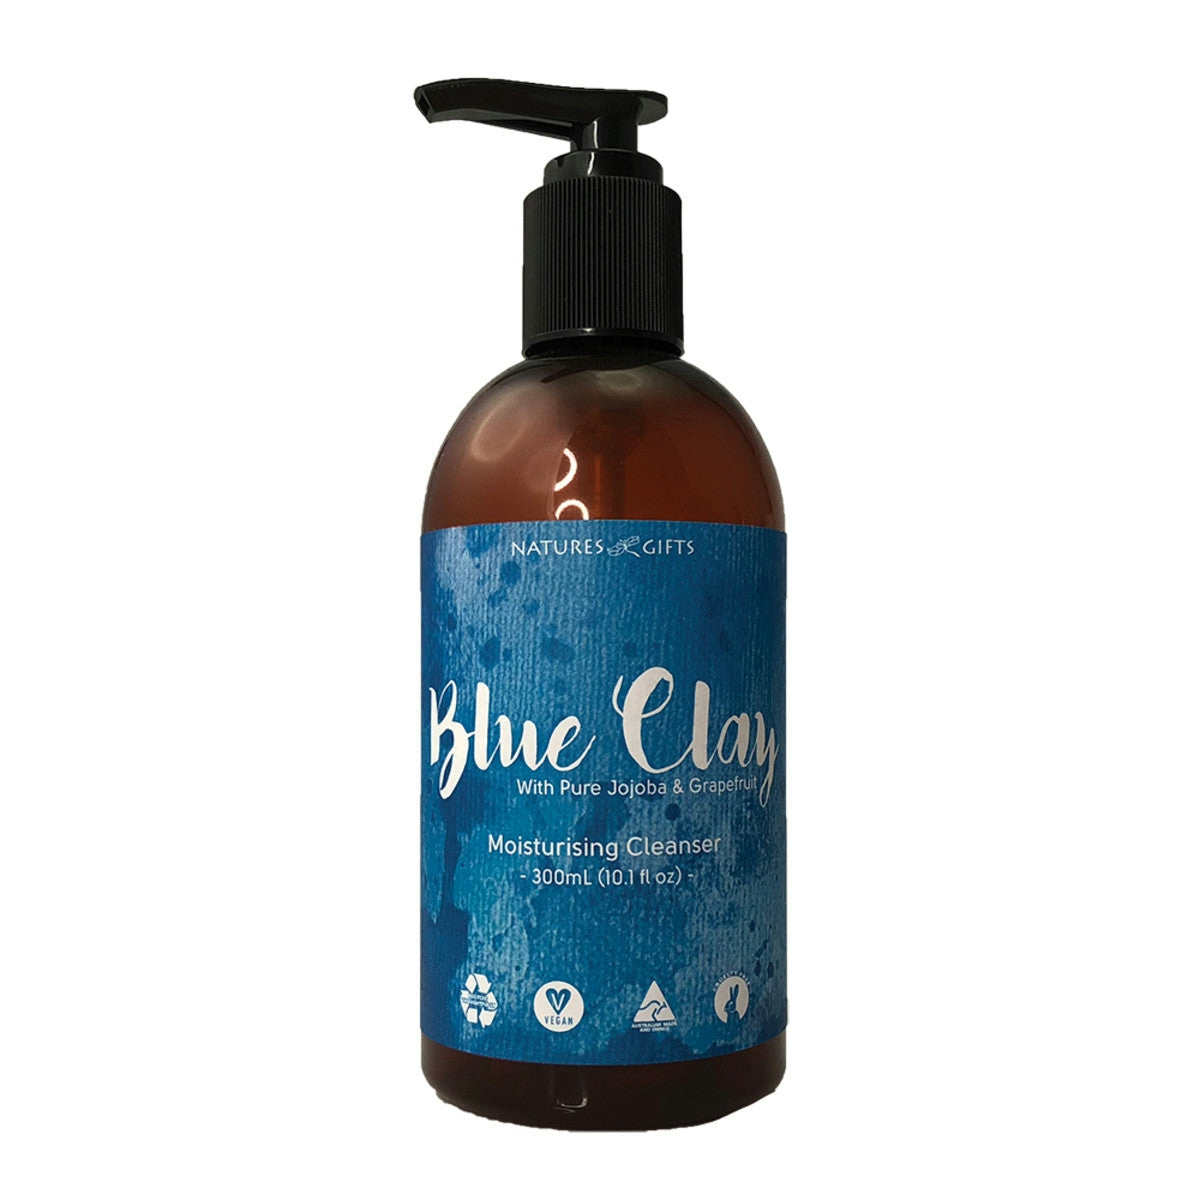 image of Clover Fields Natures Gifts Blue Clay with Jojoba & Grapefruit Moisturising Cleanser on white background 